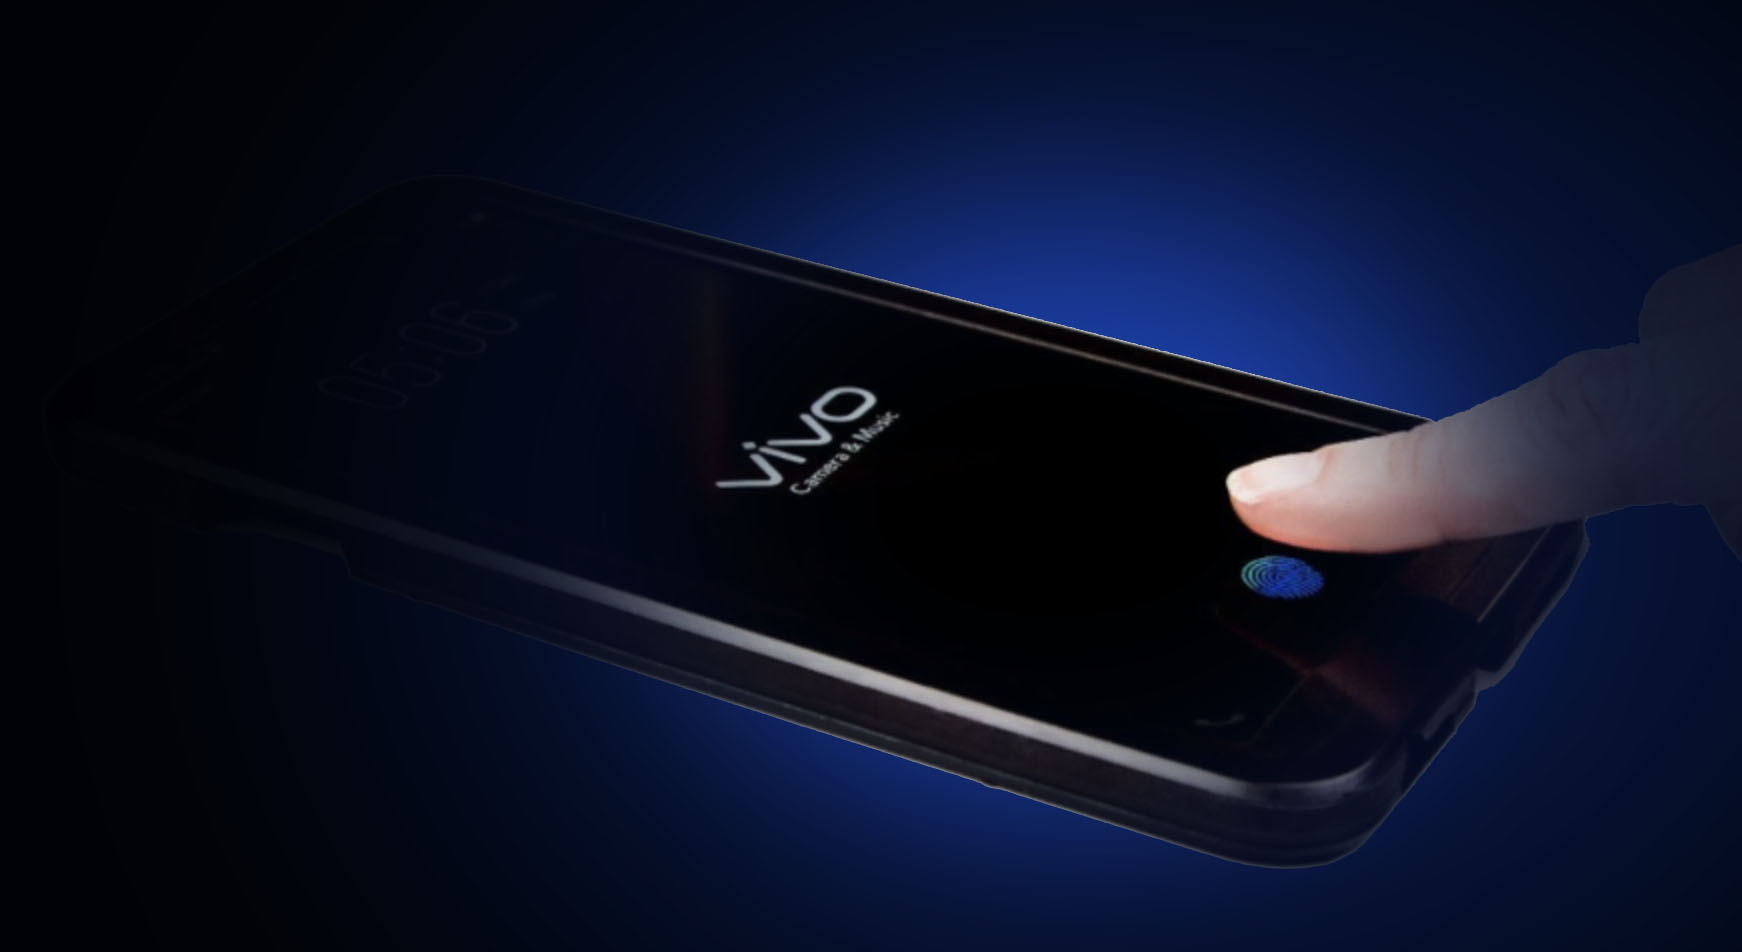 Vivo together with Snaptics showcase newest mobile phone technology at CES 2018